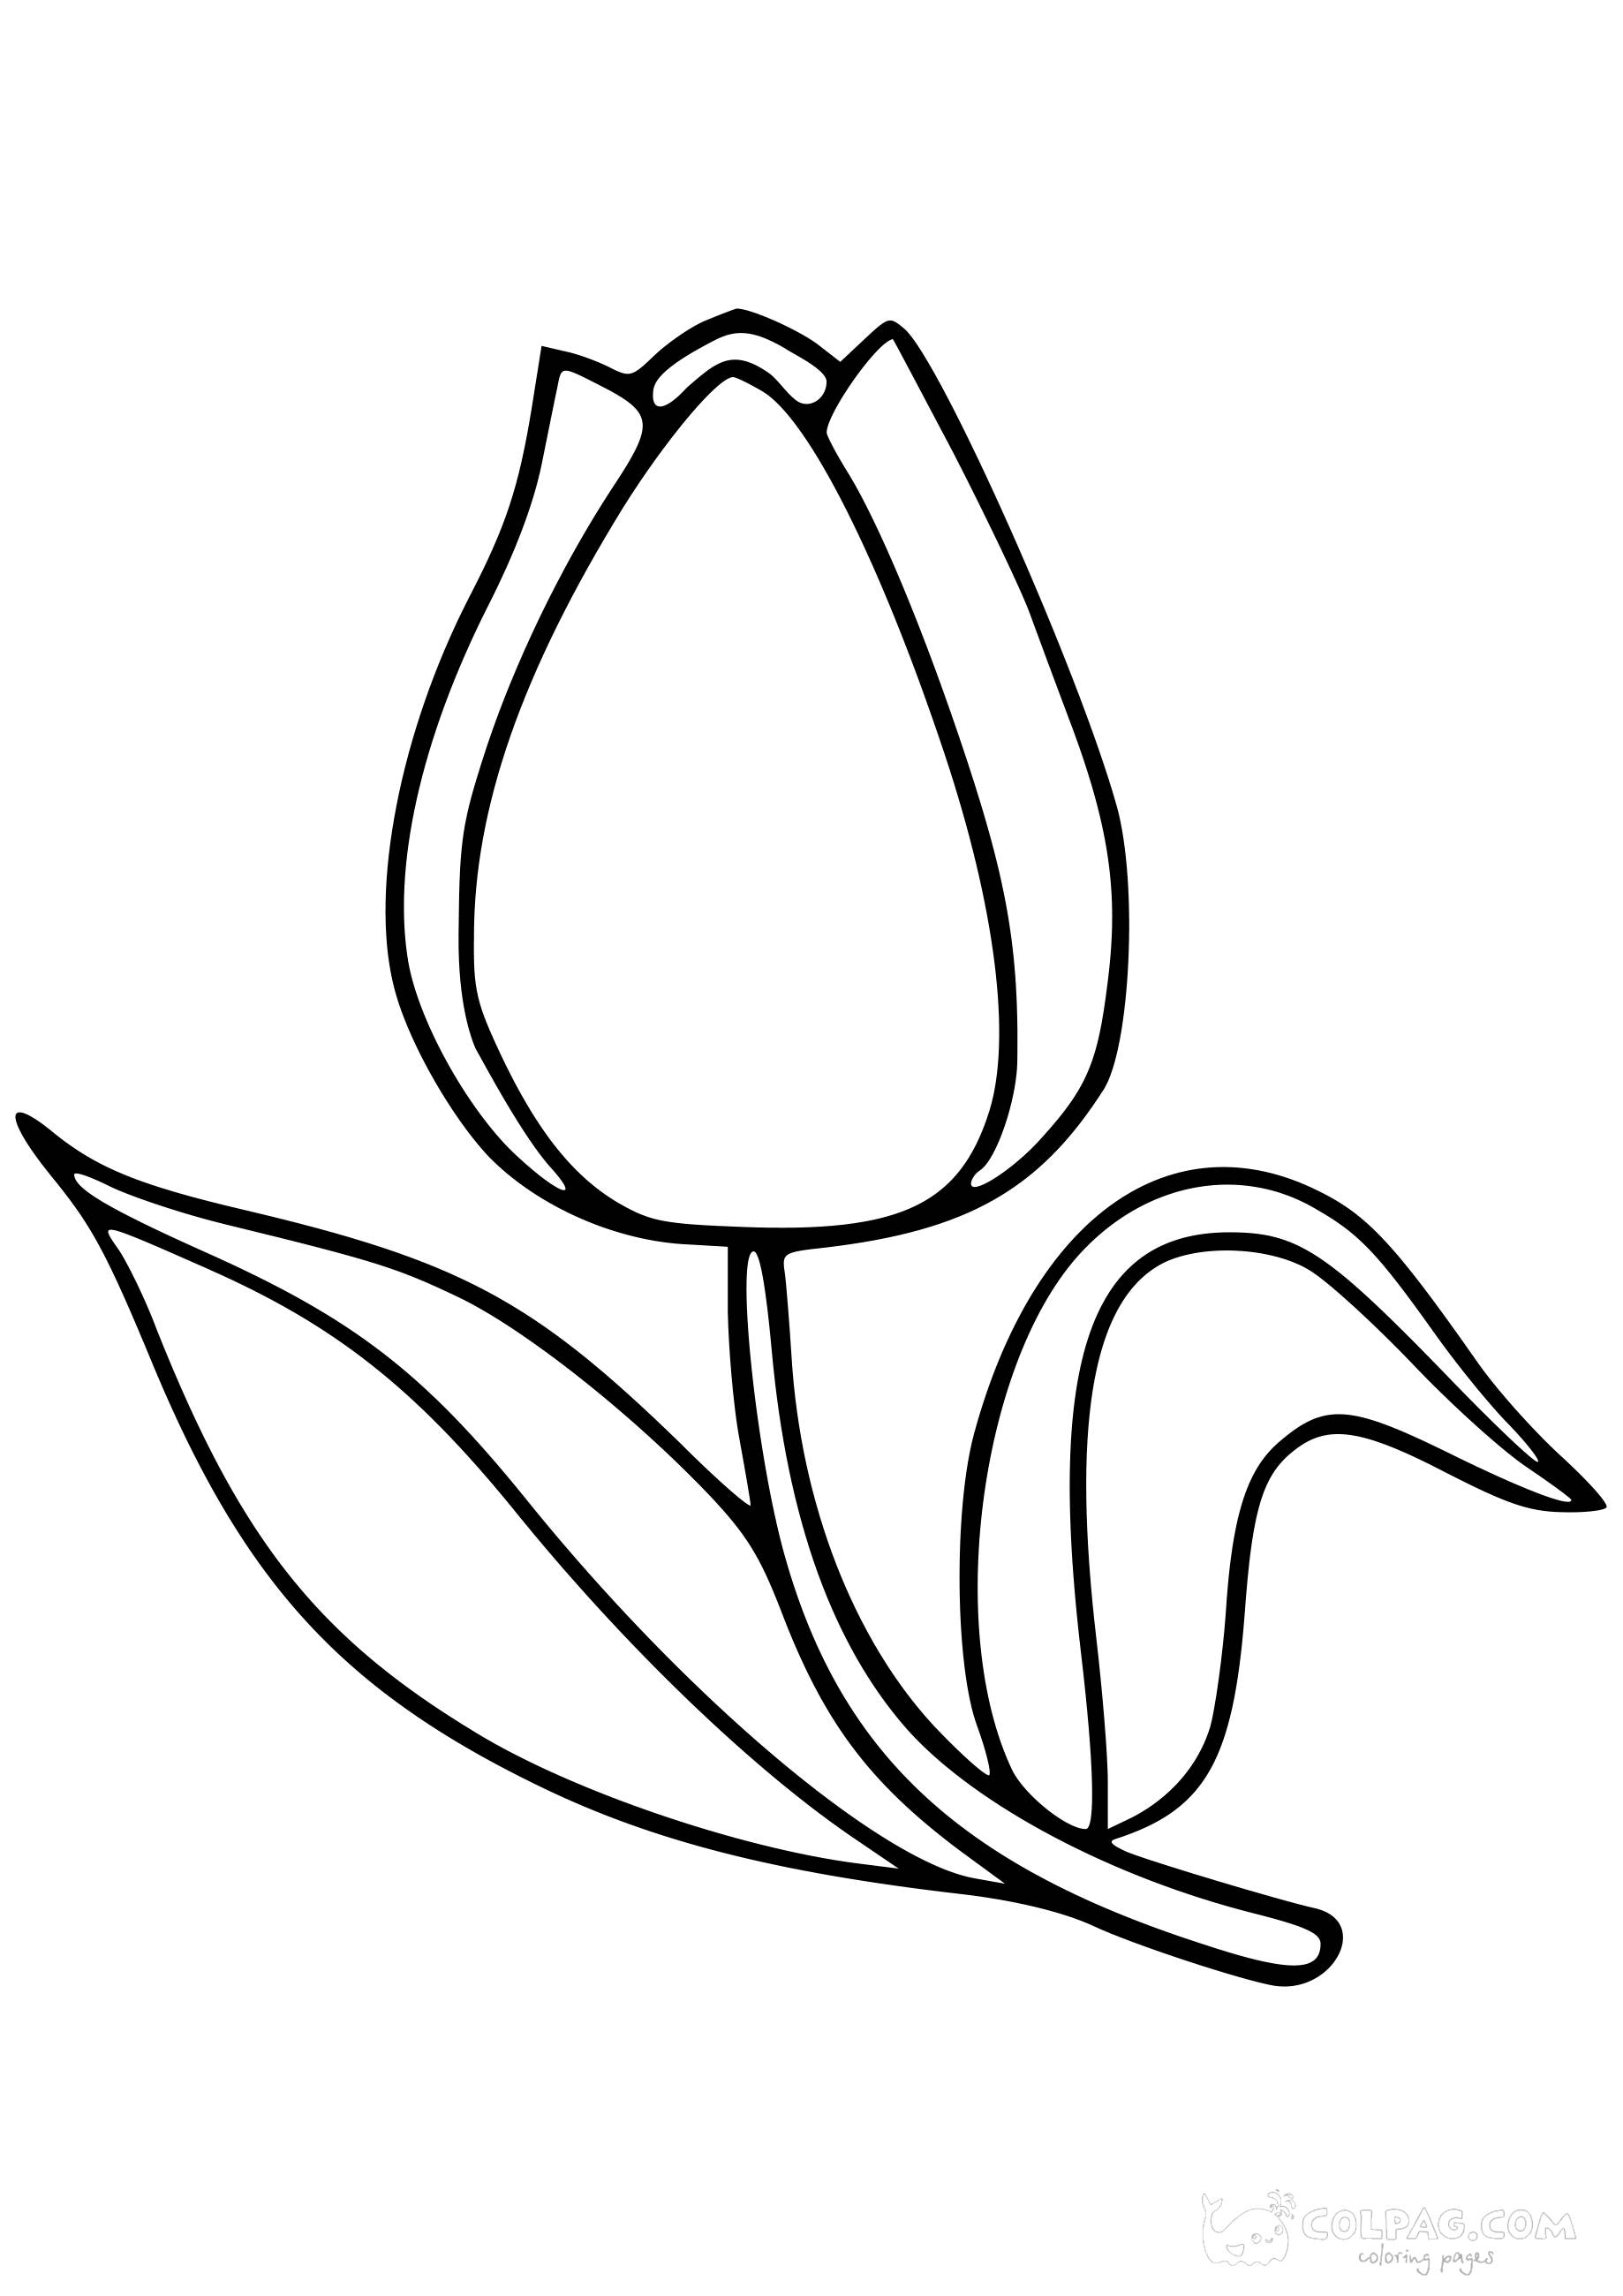 tulip-colpag-coloring-page-21